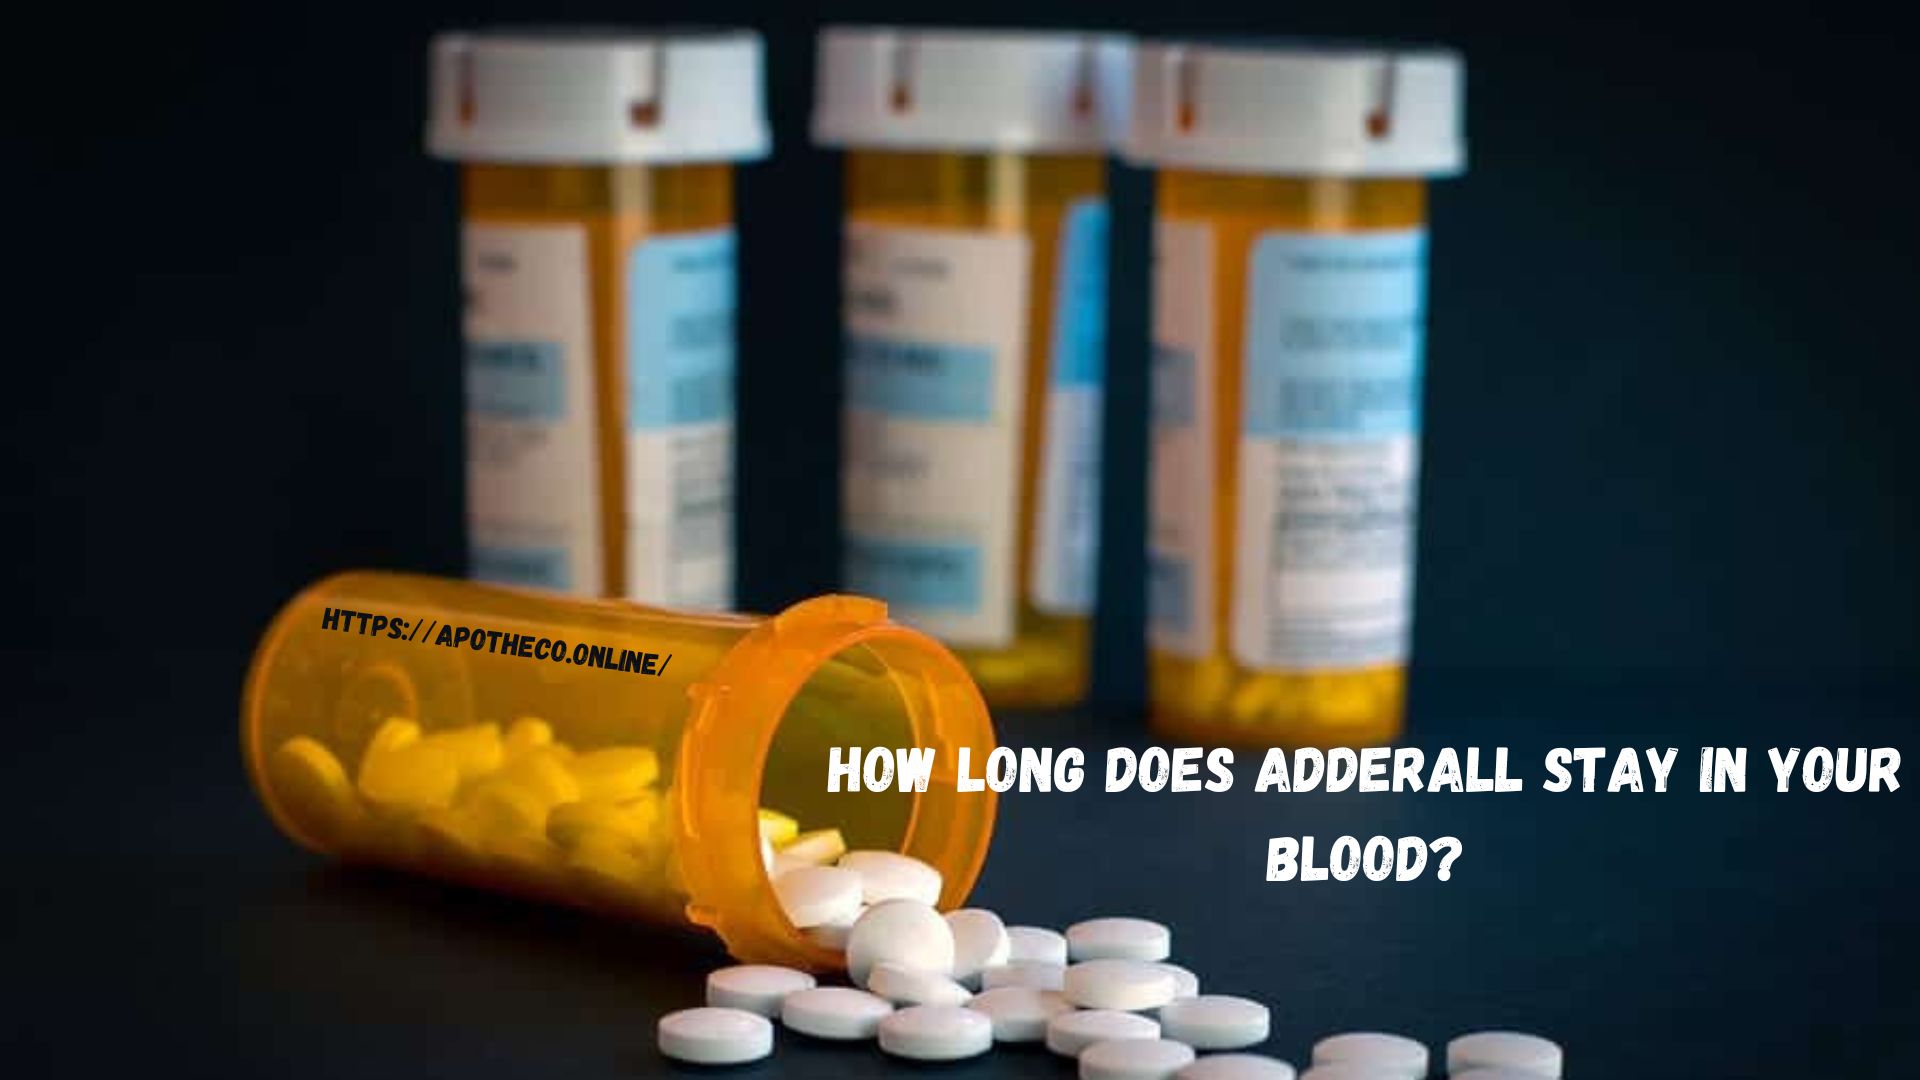 How long does Adderall stay in your blood